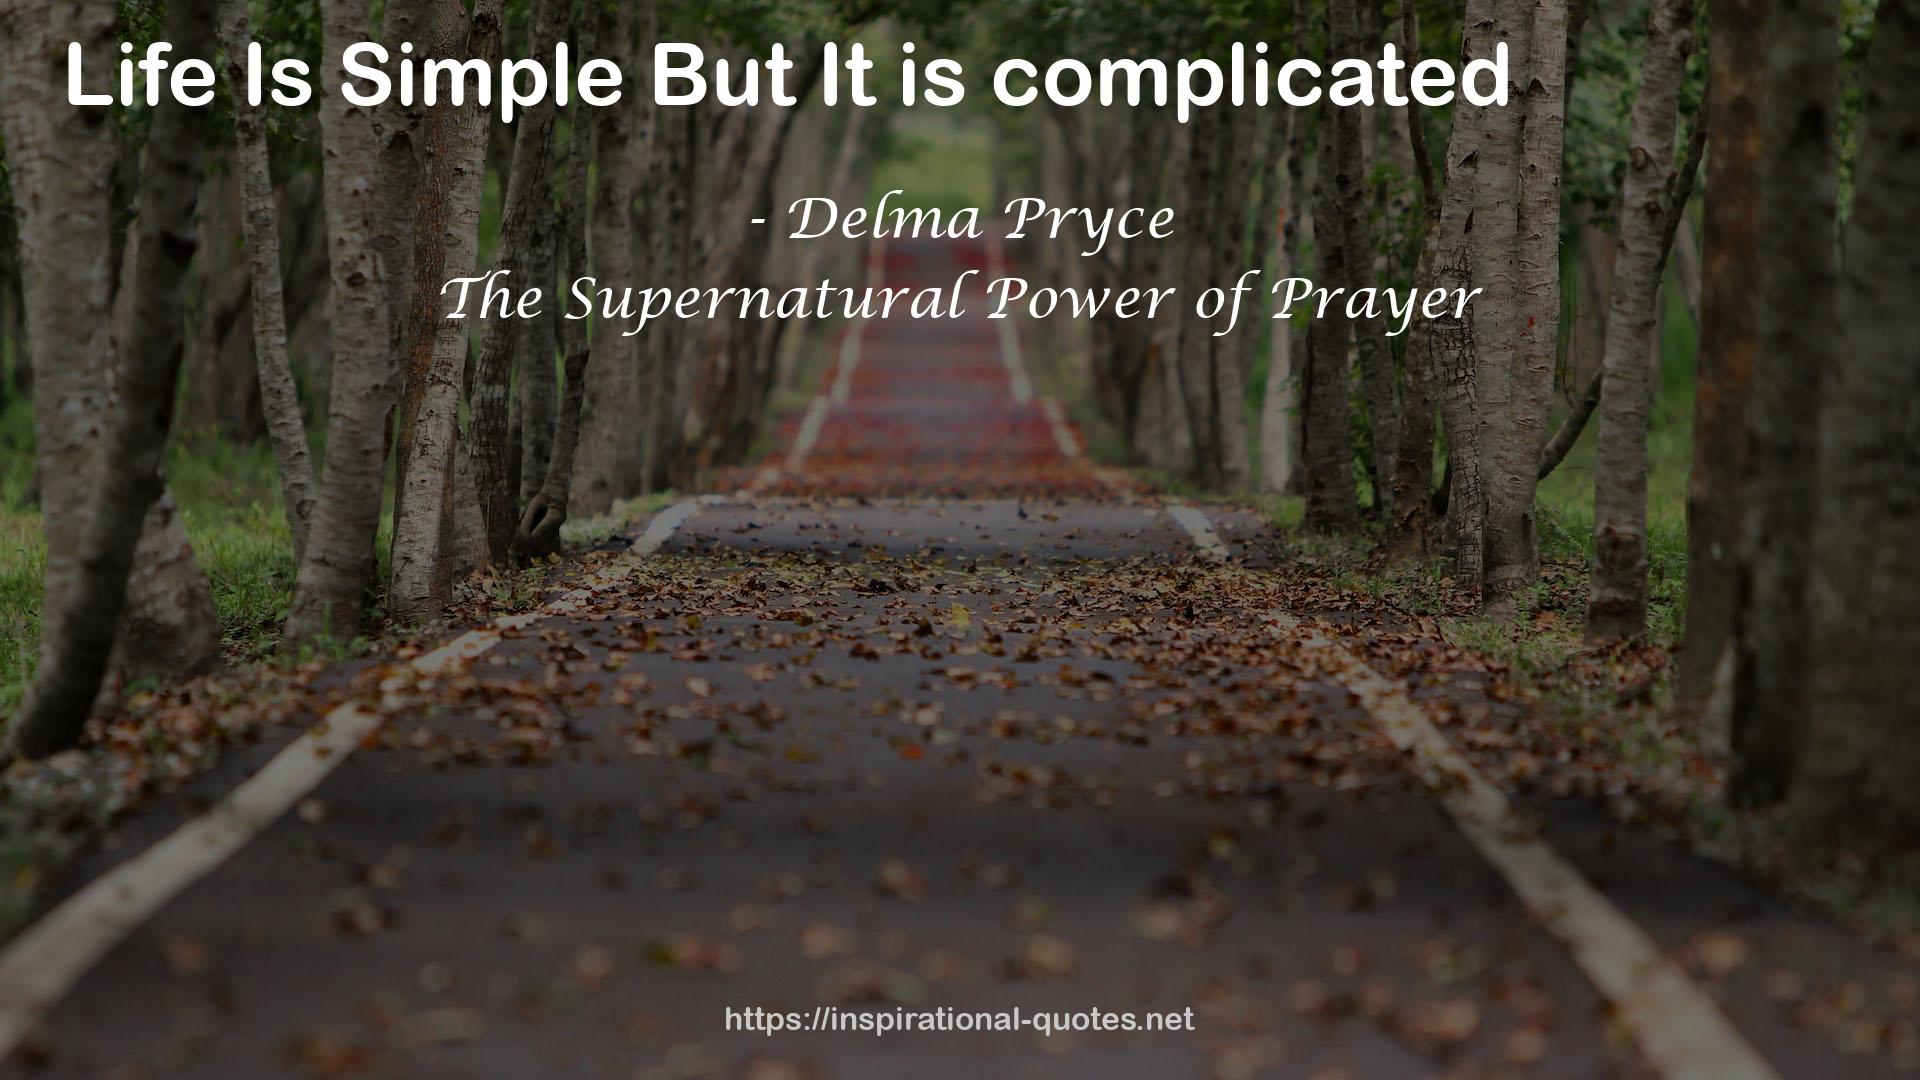 The Supernatural Power of Prayer QUOTES